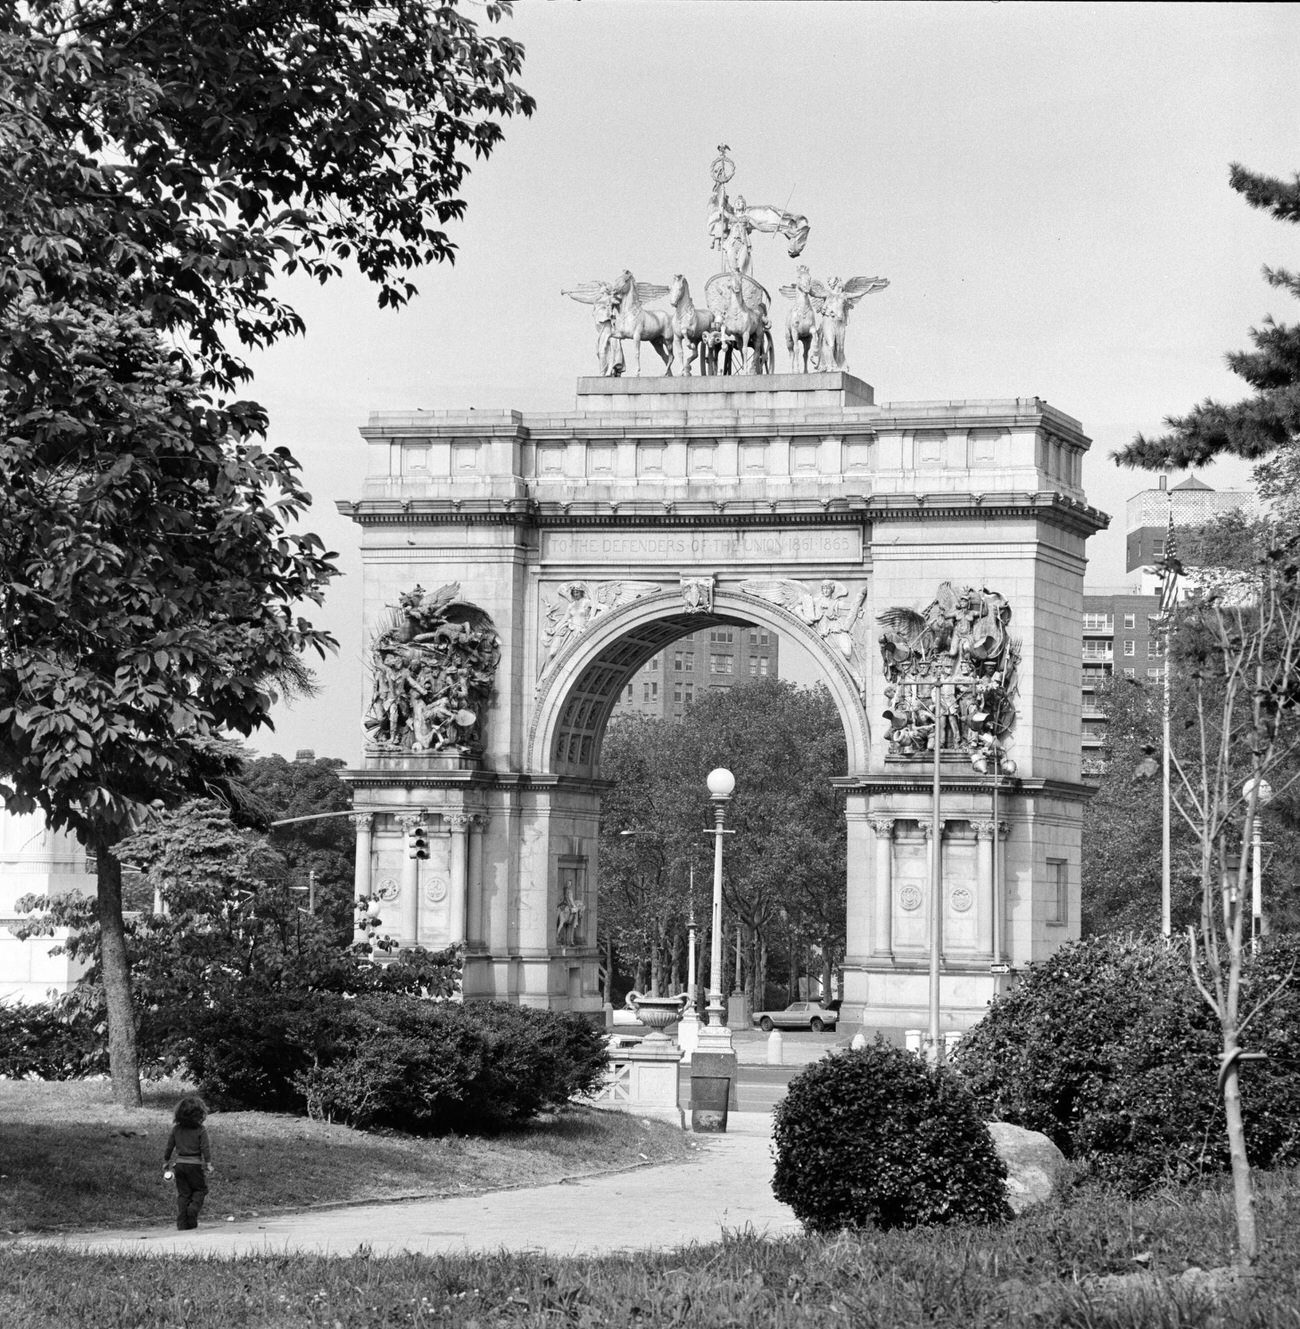 Soldiers' And Sailors' Memorial Arch In Grand Army Plaza, Brooklyn, 1975.